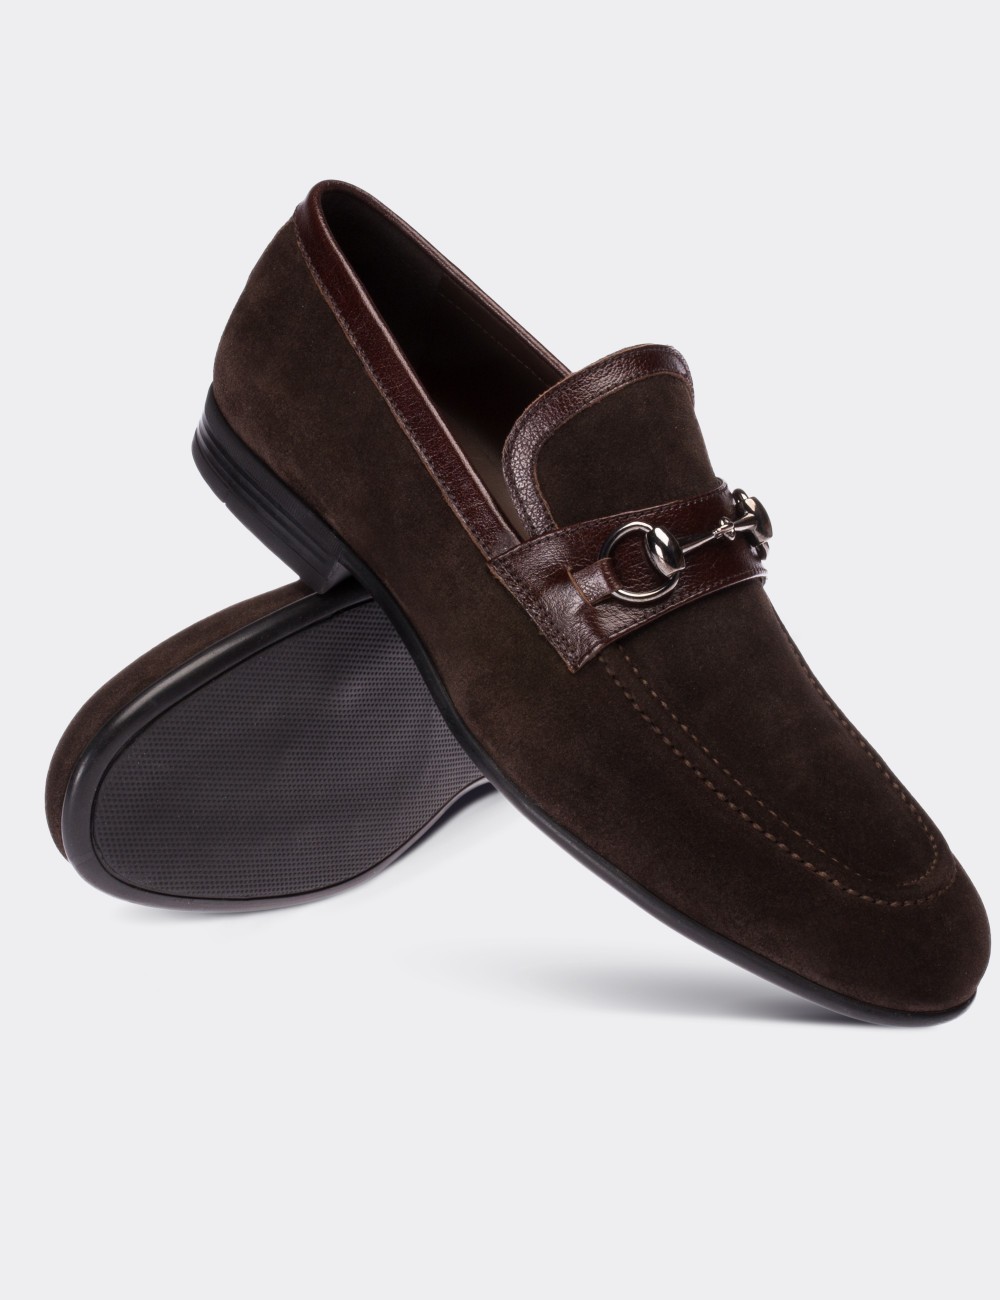 Brown Suede Leather Loafers - 01712MKHVC01